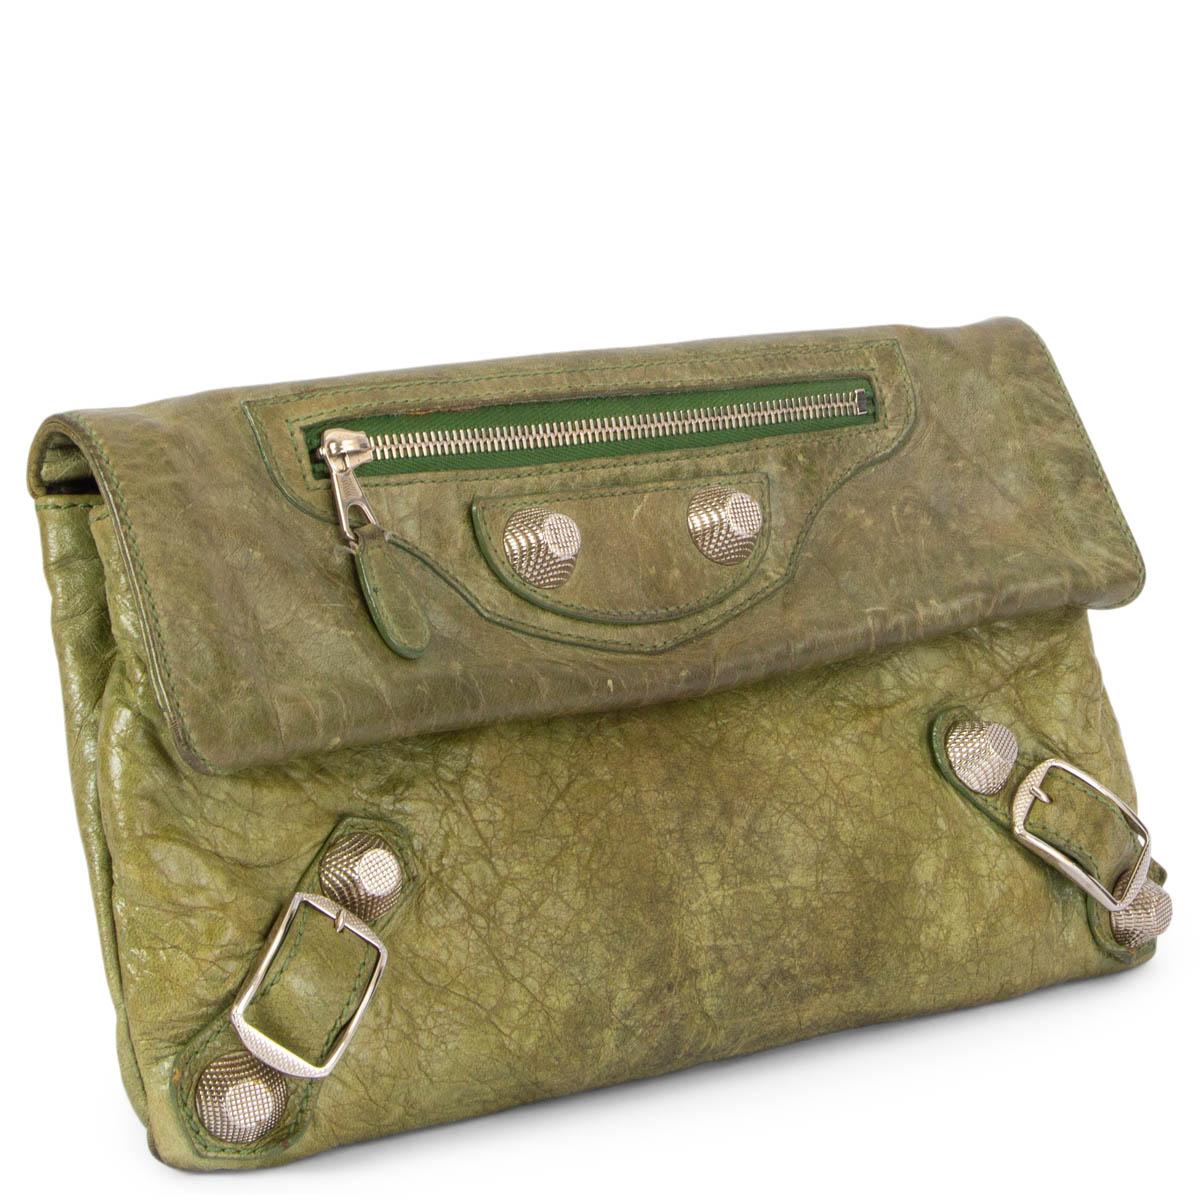 100% authentic Balenciaga Motocross Giant envelope clutch in green distressed leather. Zipper pocket on the front and a flat pocket under the flap. Closes with a zipper on top. Lined in black cotton and divided in two compartments. Has been carried